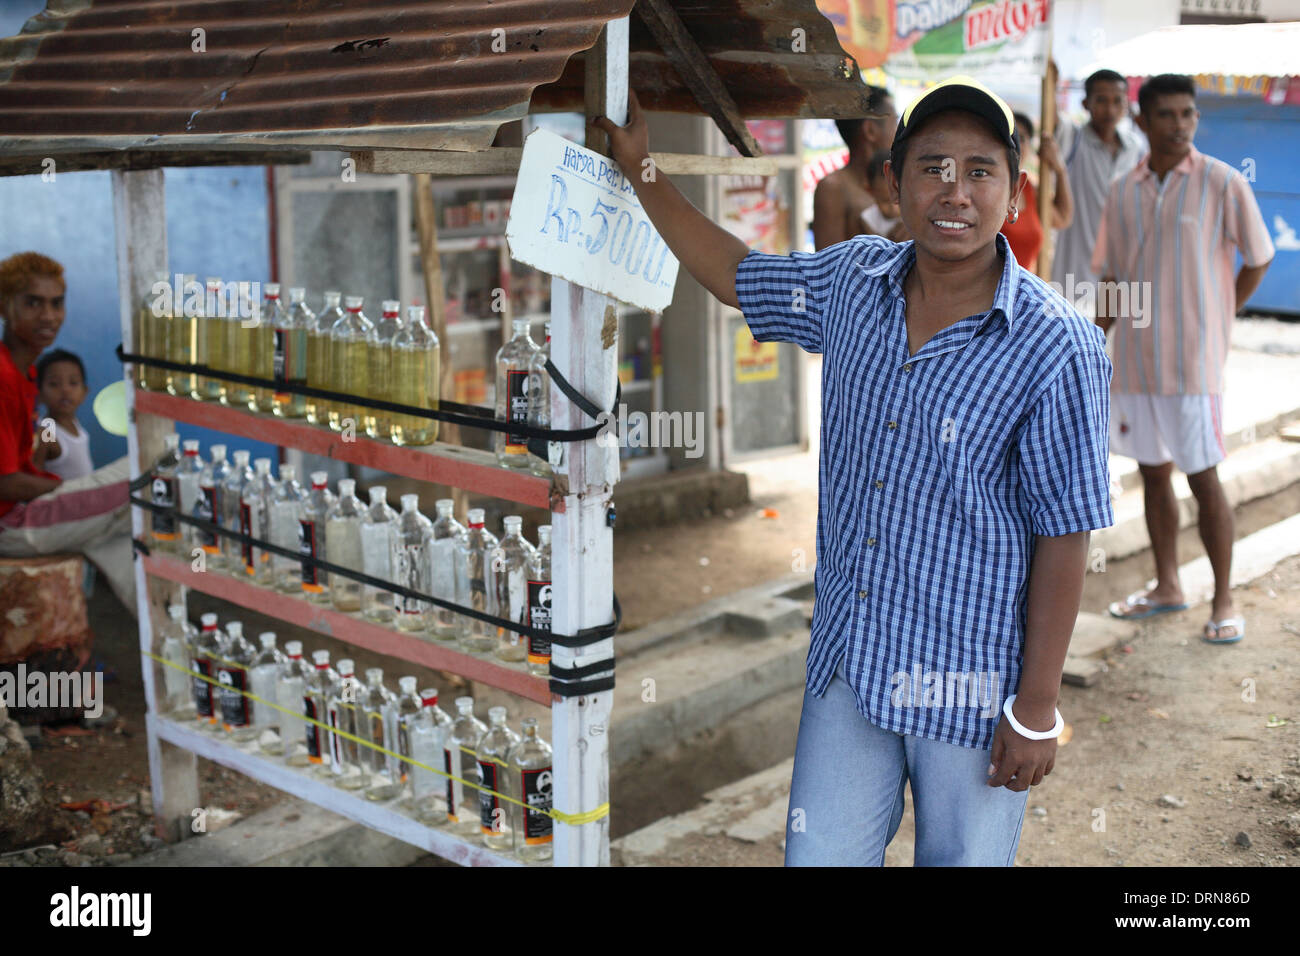 A smiling young man sells gasoline / petrol in bottles along the side of the road. Kupang, West Timor, Indonesia Stock Photo